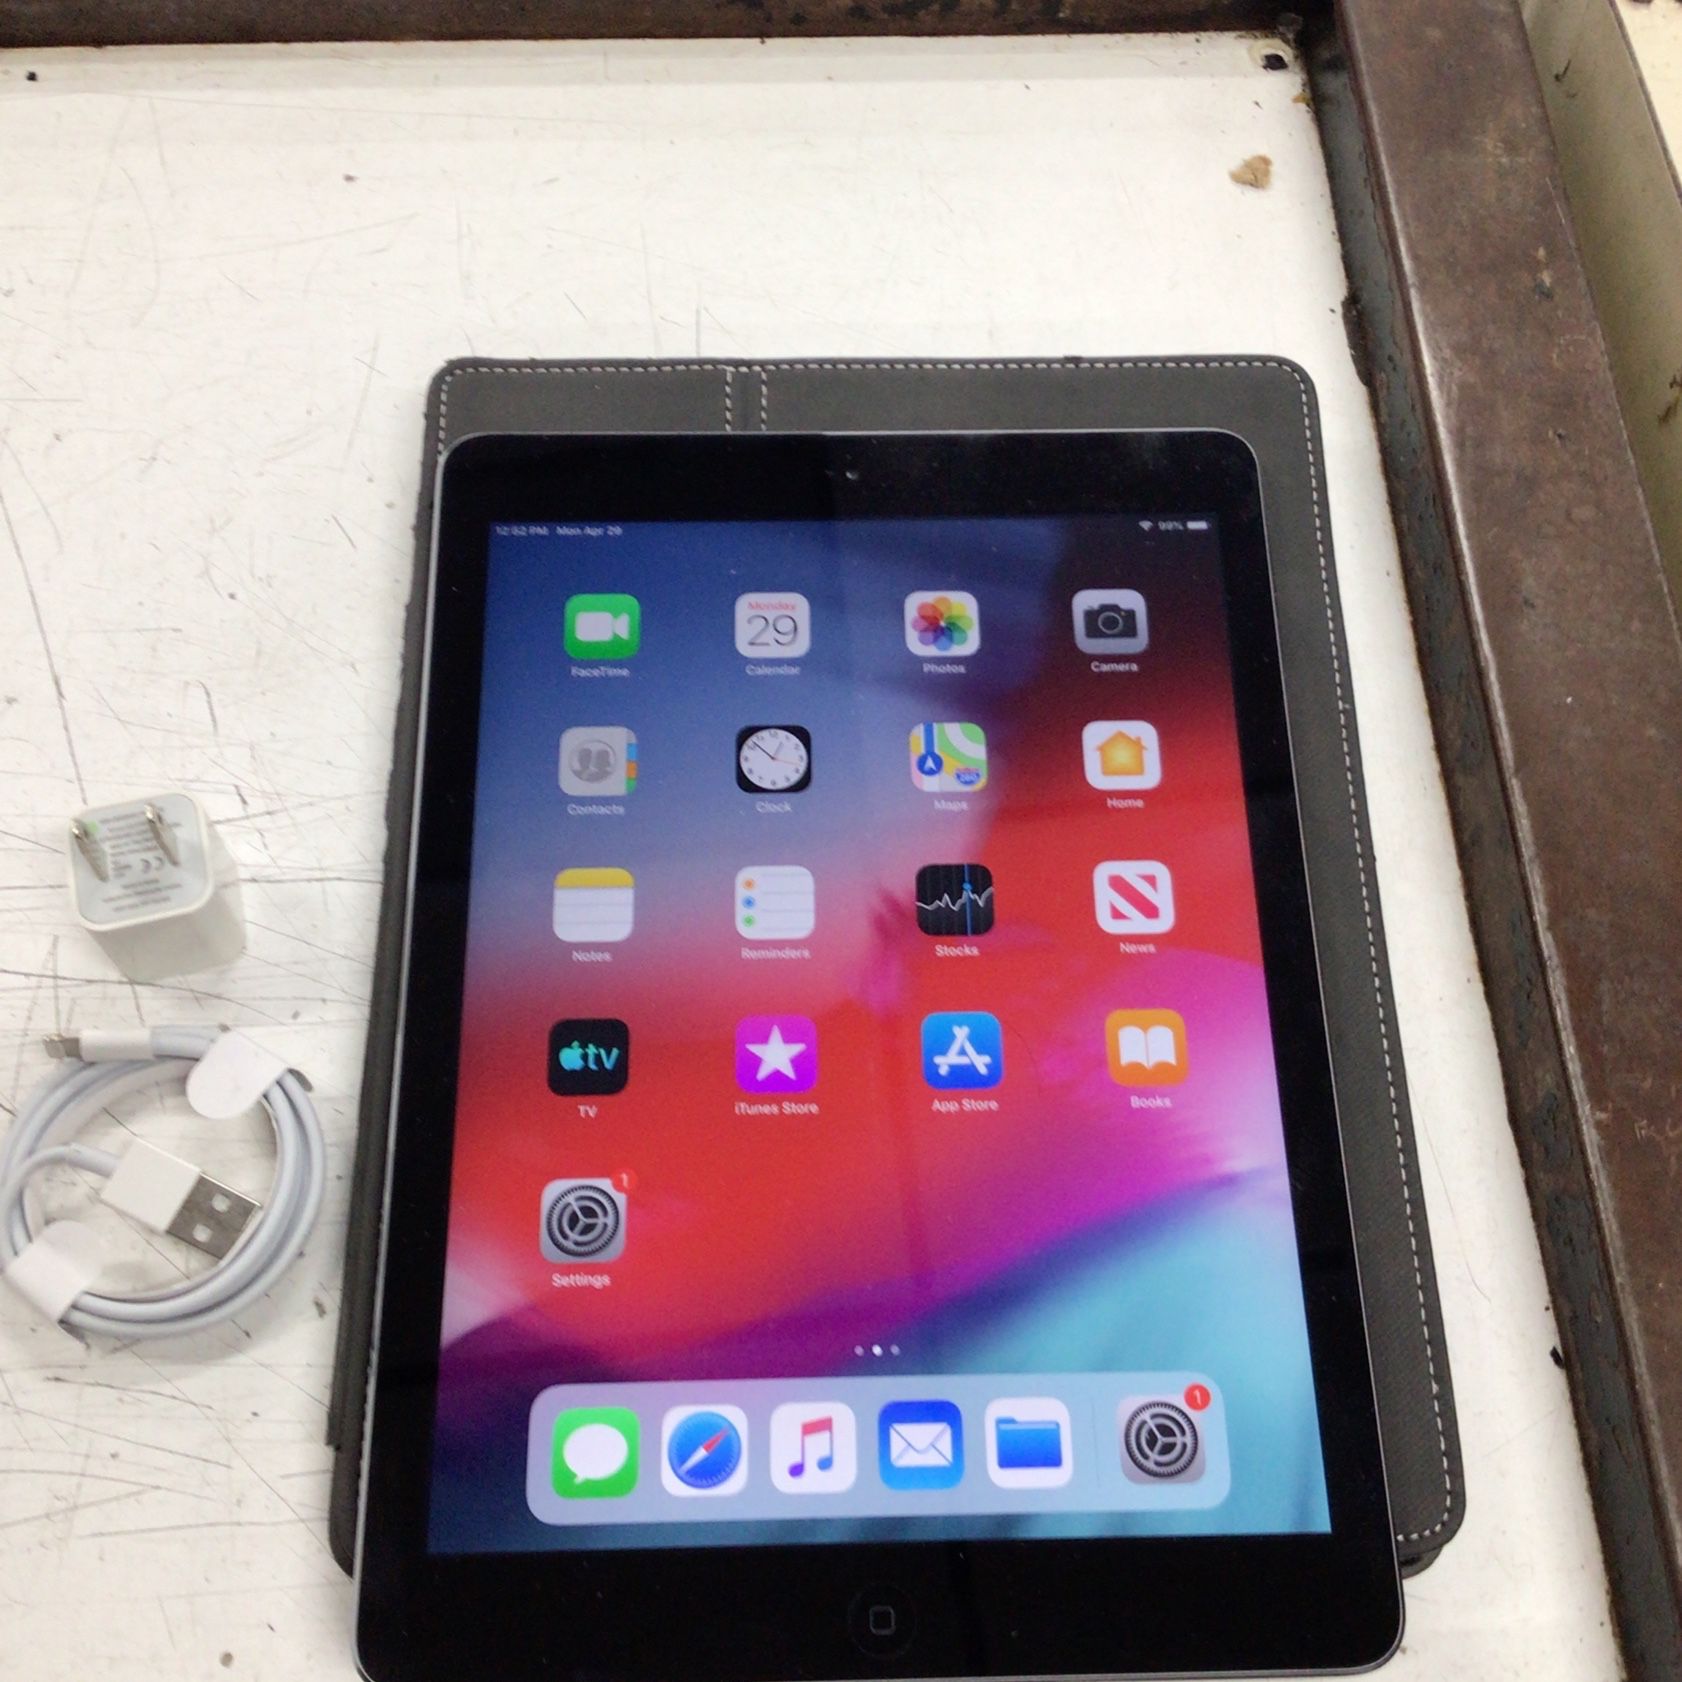 Apple iPad Air 1st Generation  9.7” 16 GB Wi-Fi  Includes Charger A1474 Factory Reset No iCloud